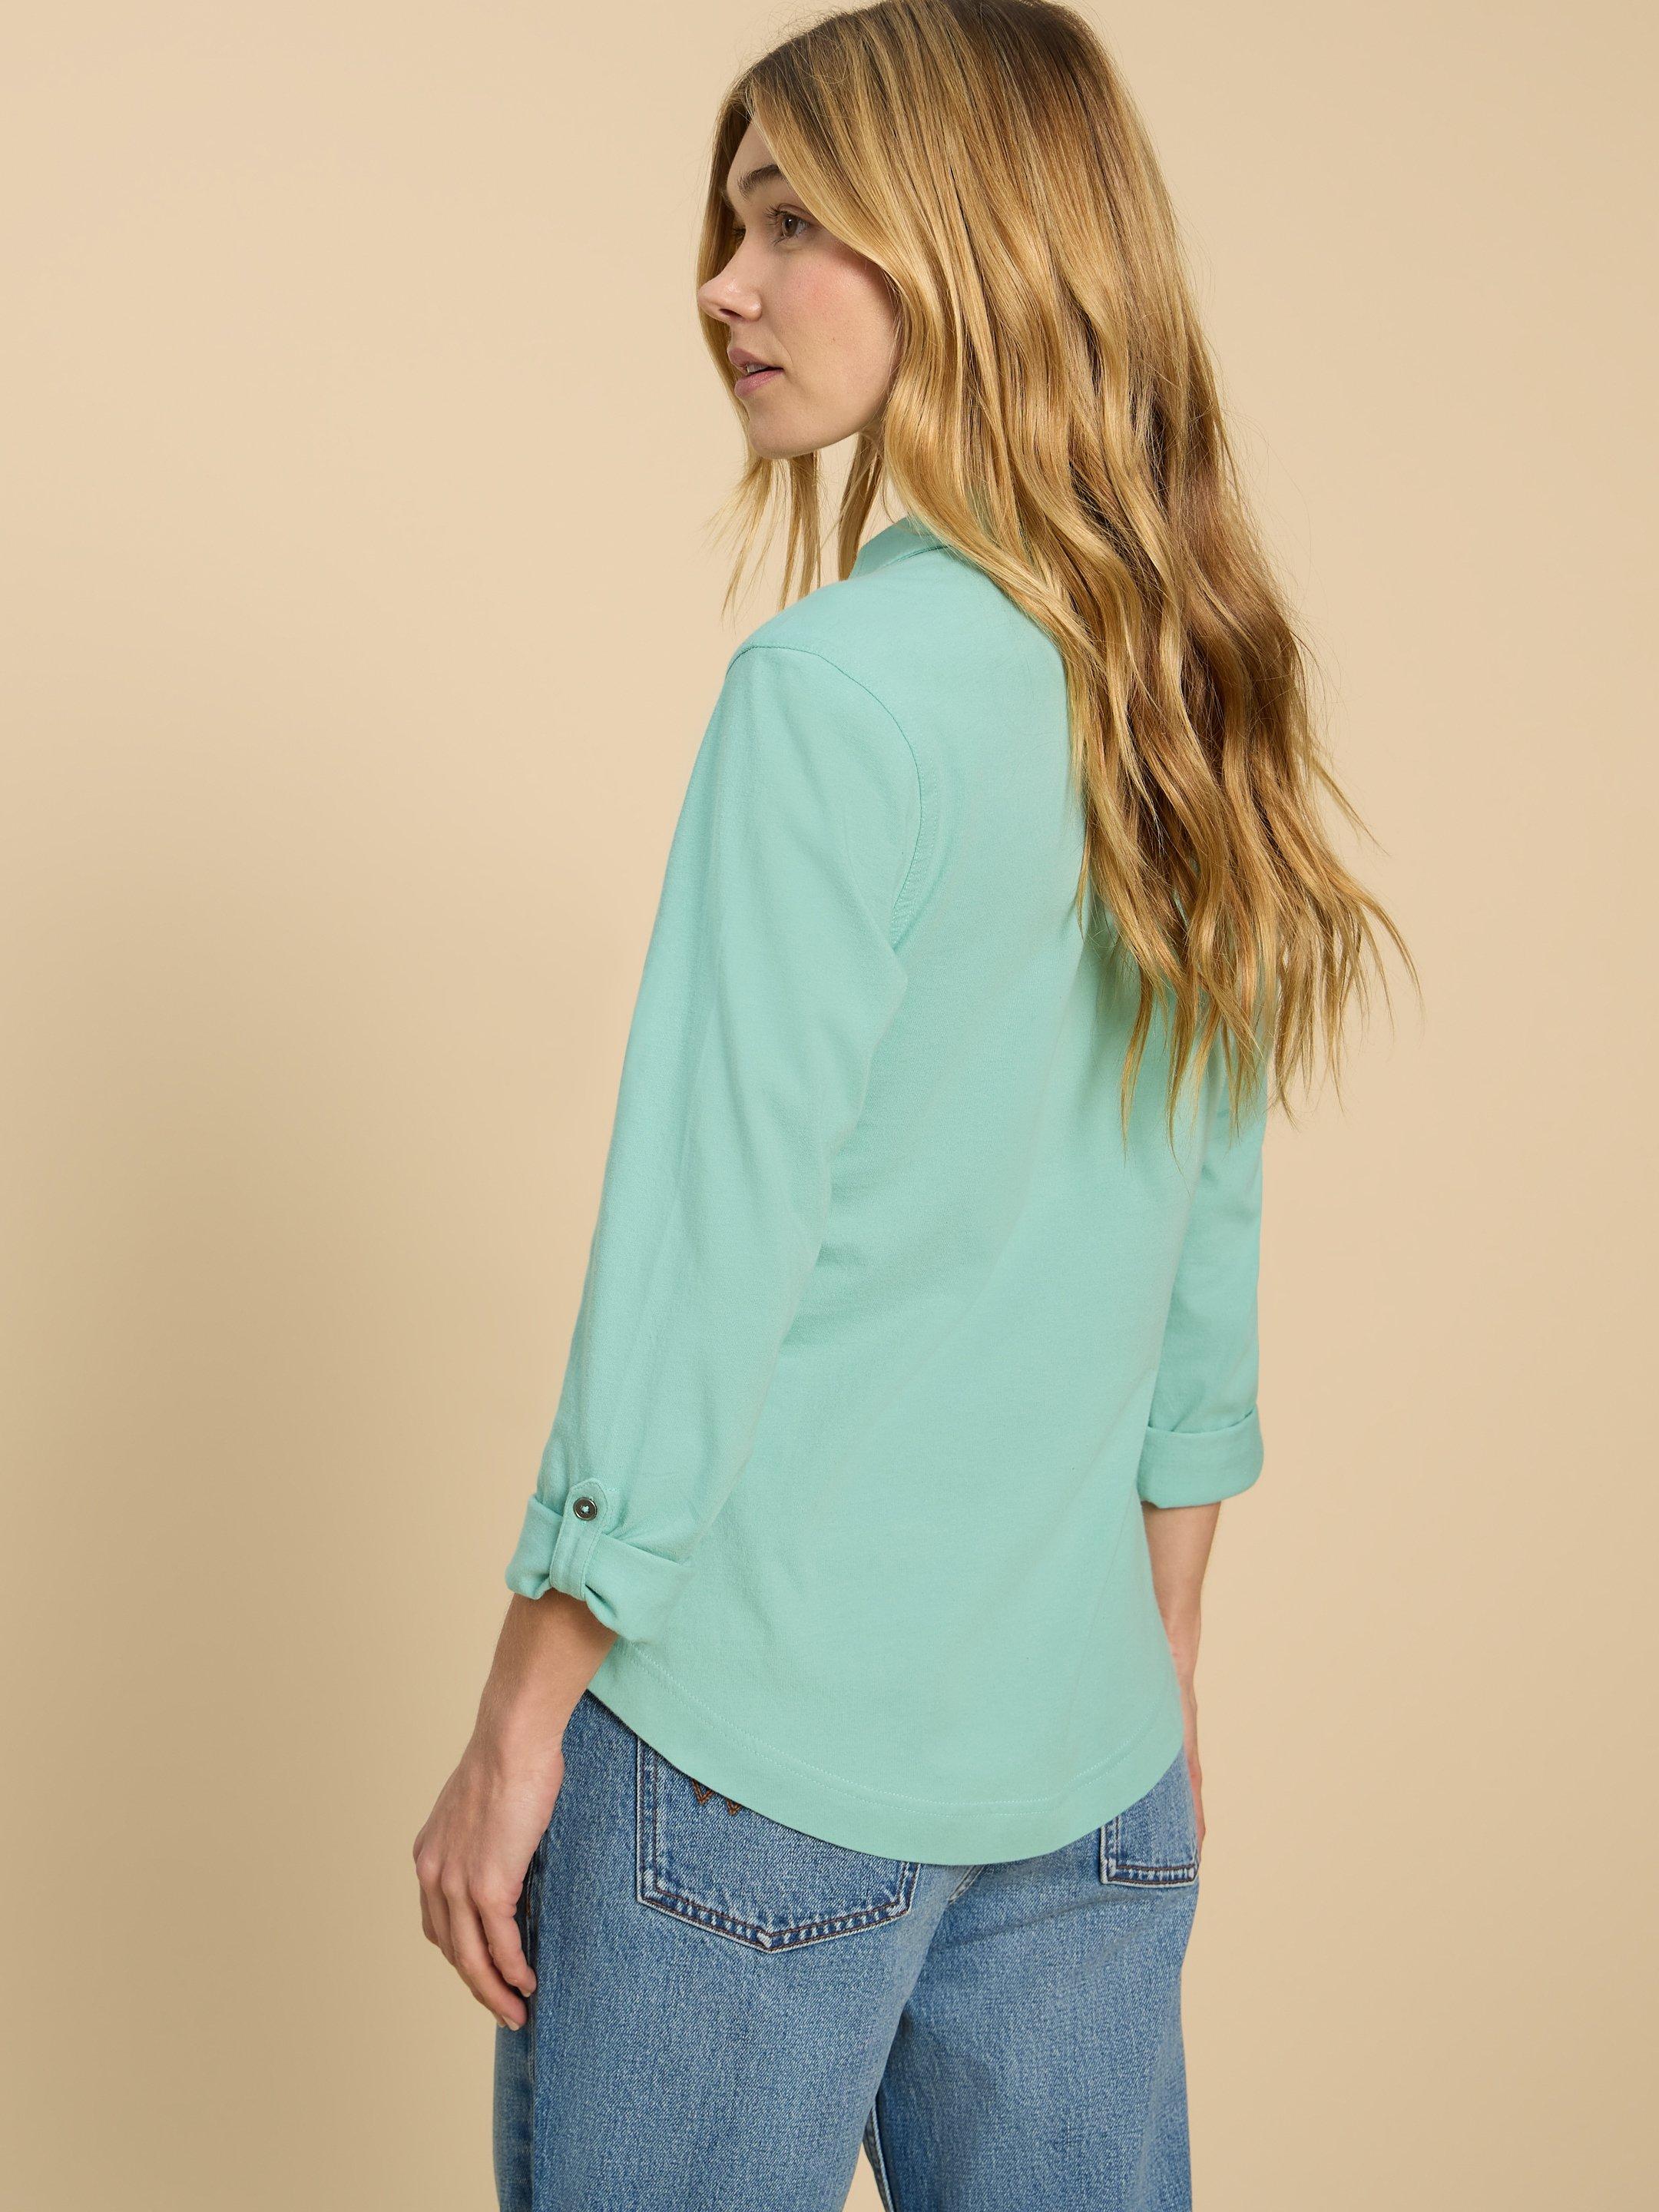 ANNIE JERSEY PRINT SHIRT in MID TEAL - MODEL BACK